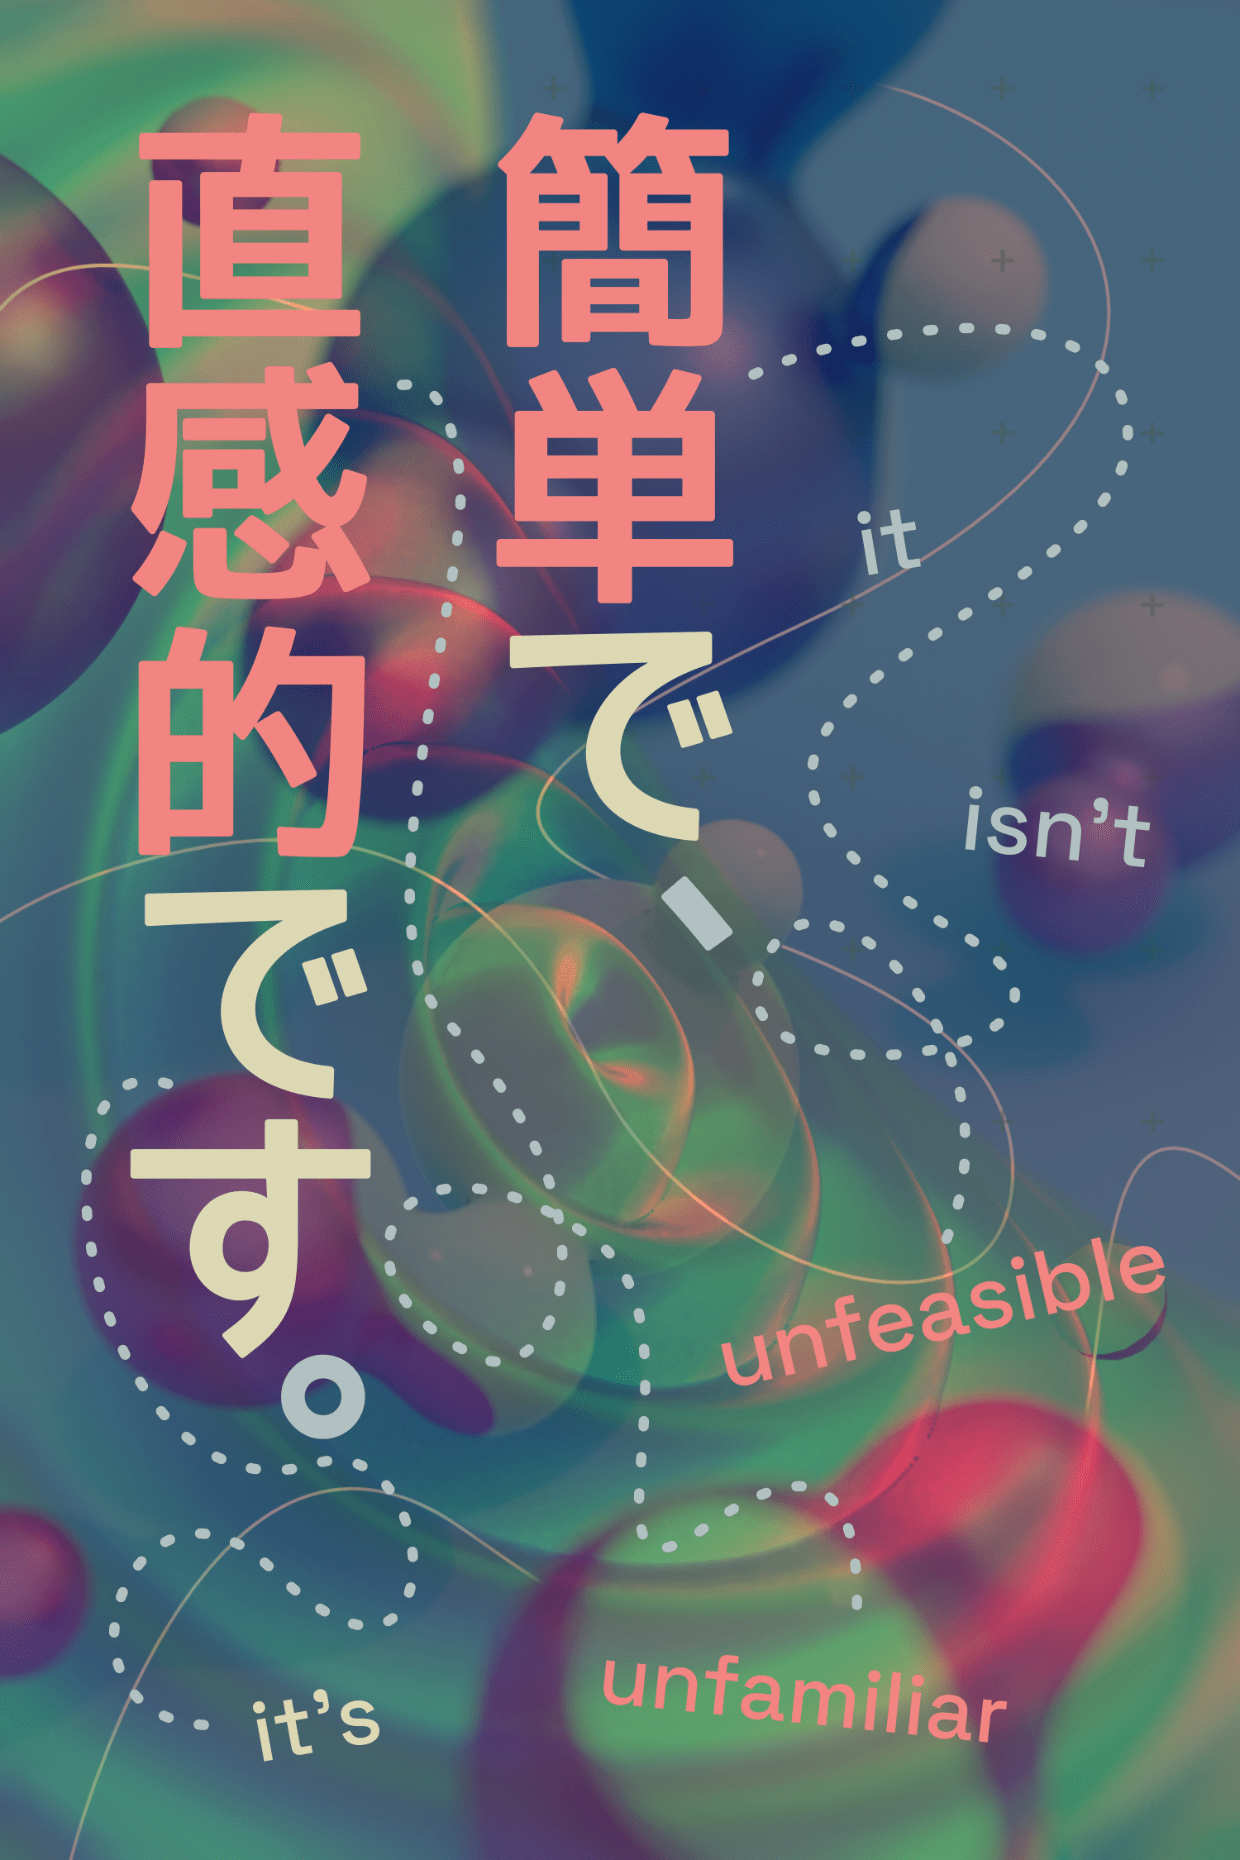 a poster with text "it isn't unfeasible, it's unfamiliar" in japanese and english, composited atop an image of floating blobs